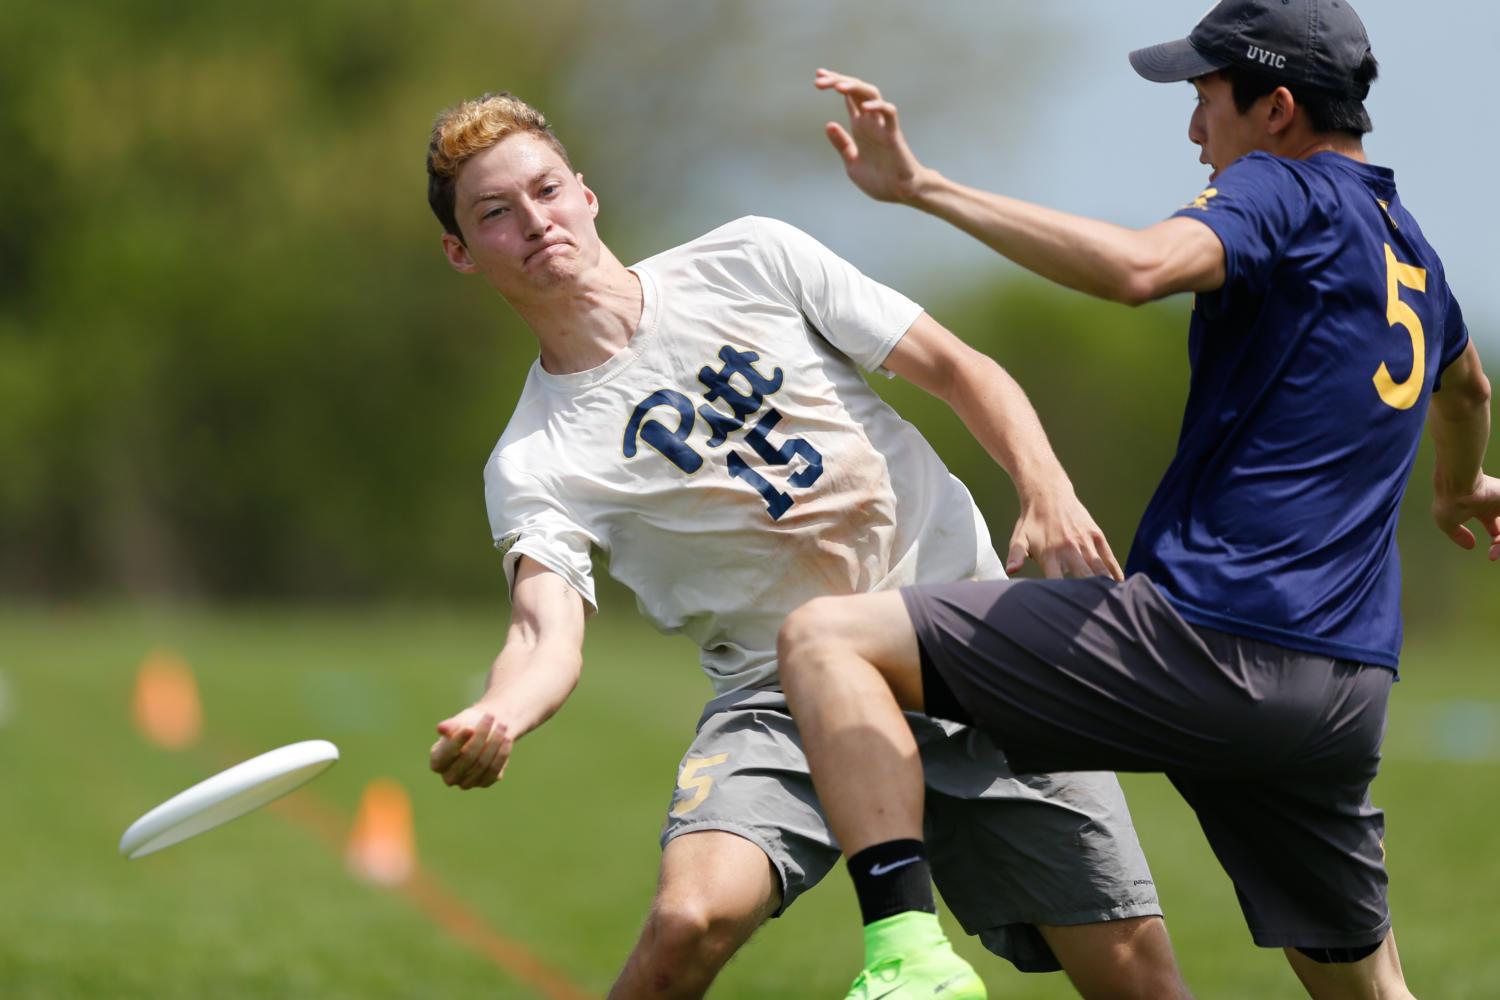 Ultimate Frisbee: the sport of champions - The Talon